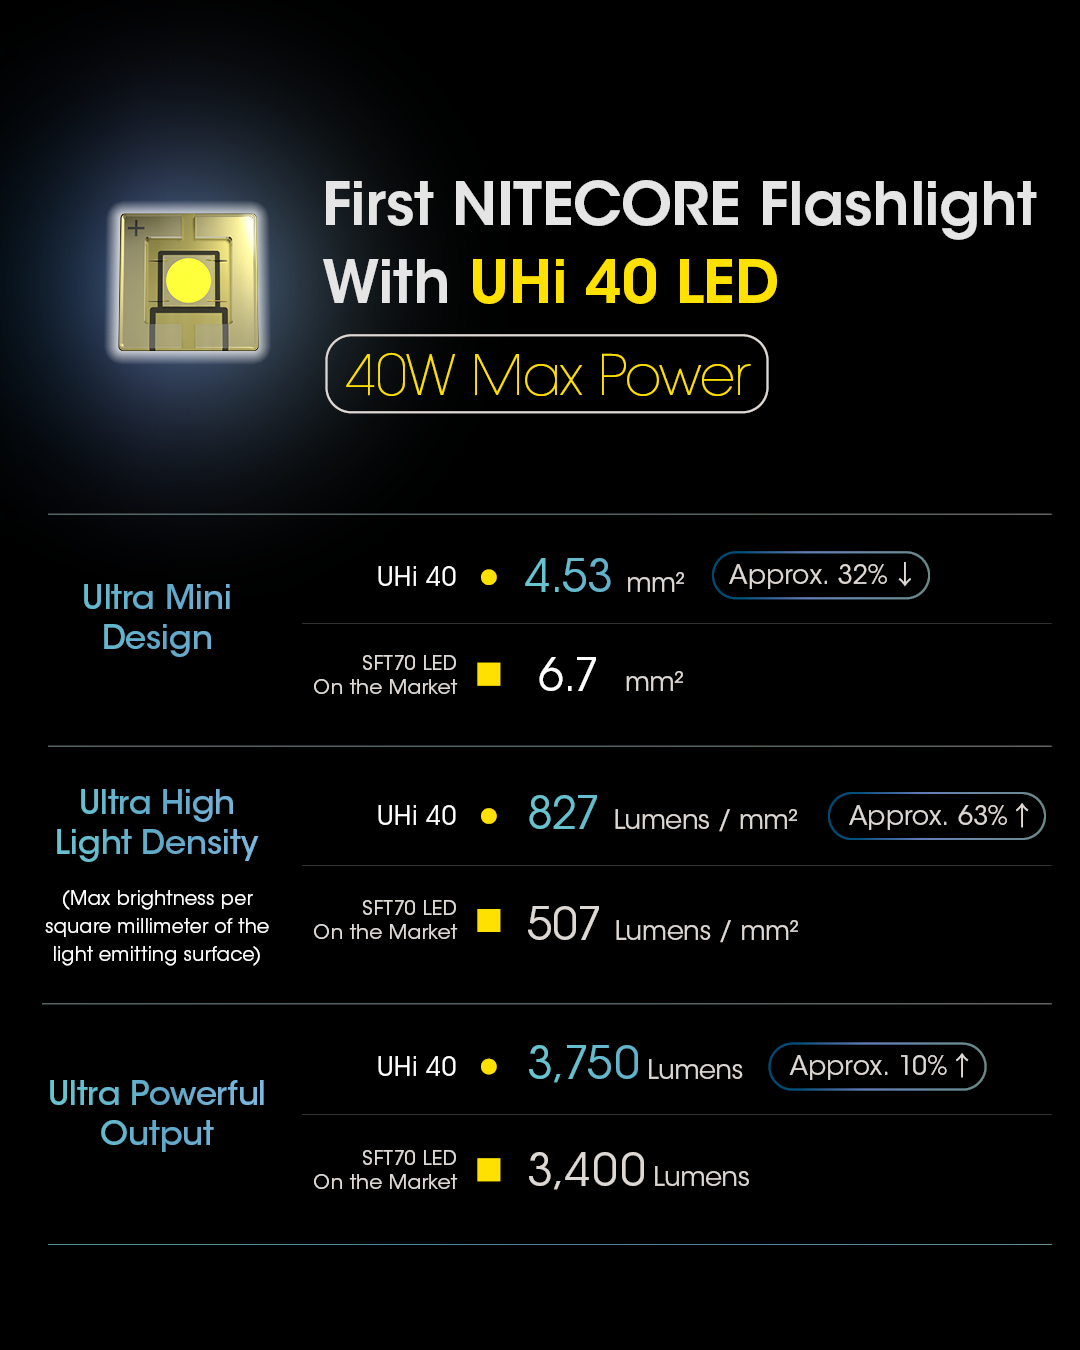 Sale-NITECORE-MH12-Pro-3300-Lumens-Rechargeable-Compact-Flashlight-505-Meter-Tac